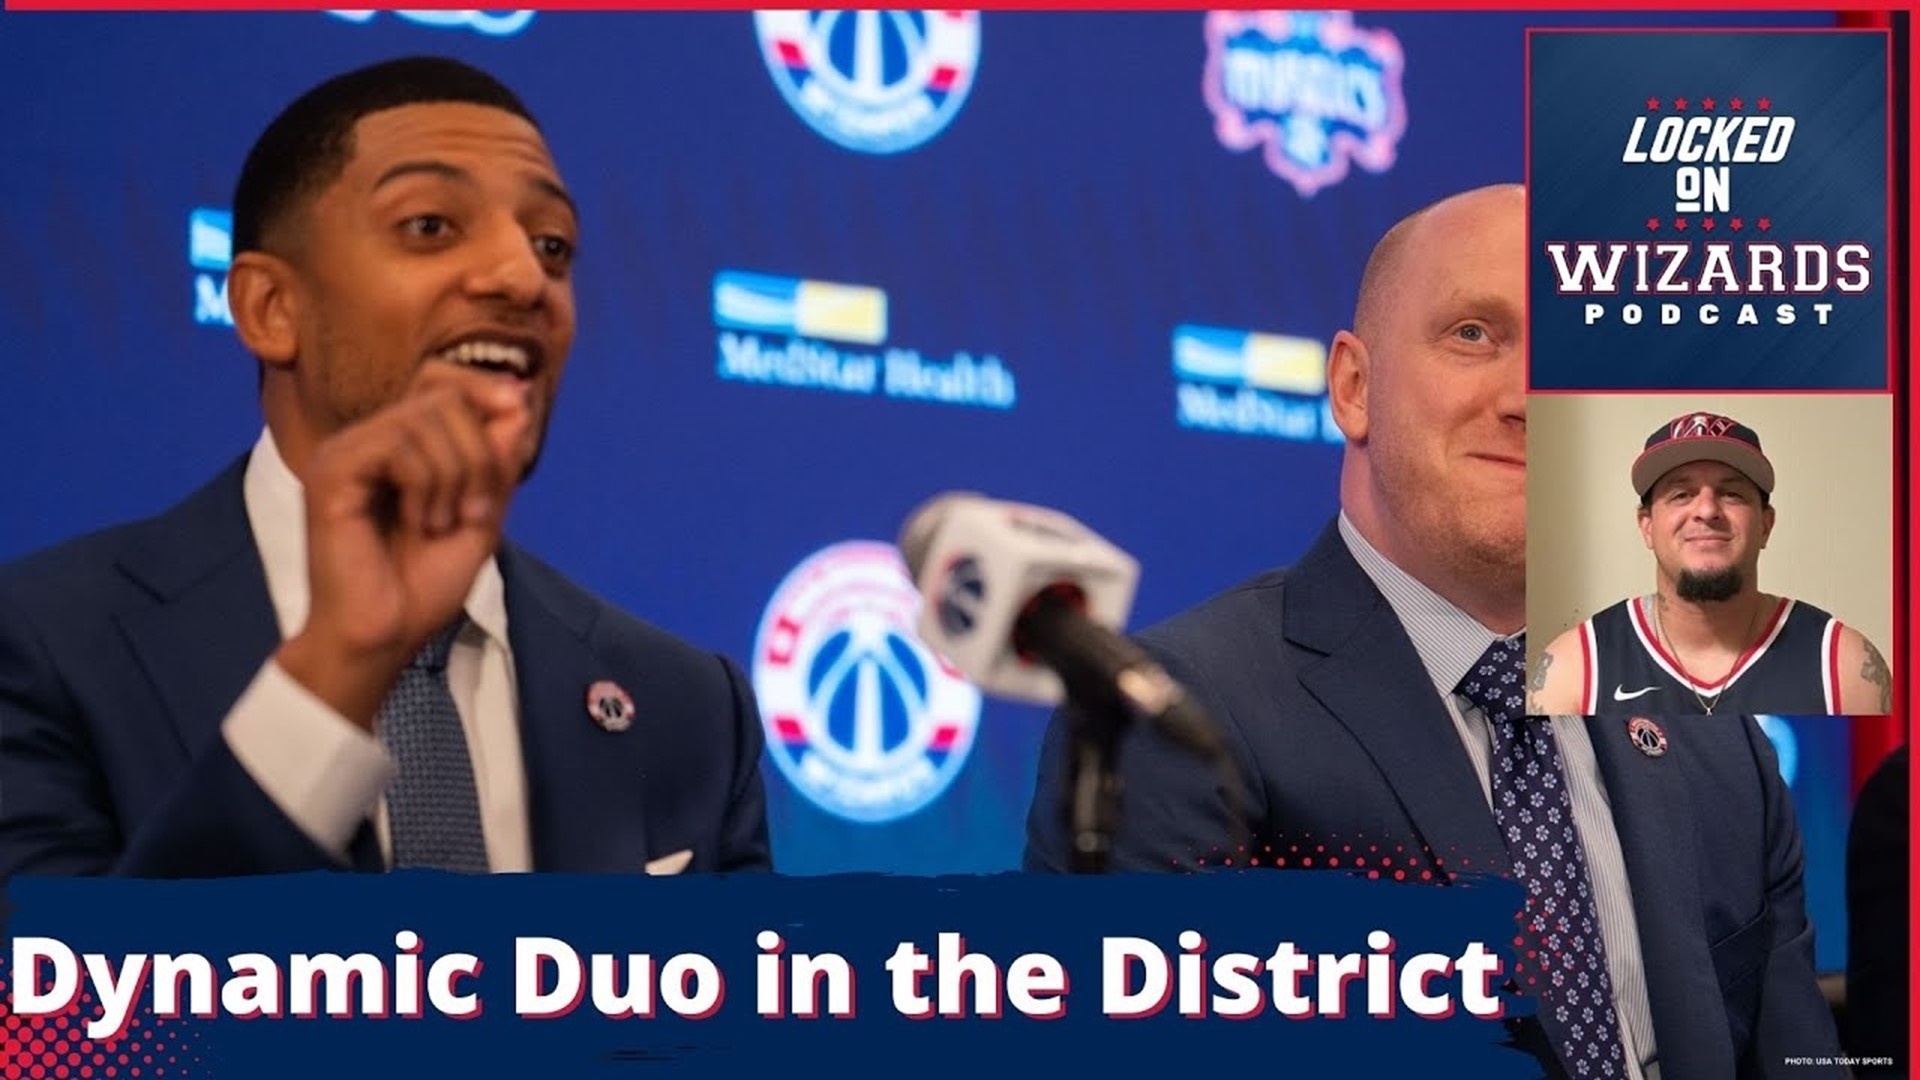 Brandon breaks down the three main reasons why Wizards fans should be optimistic about the future in DC.